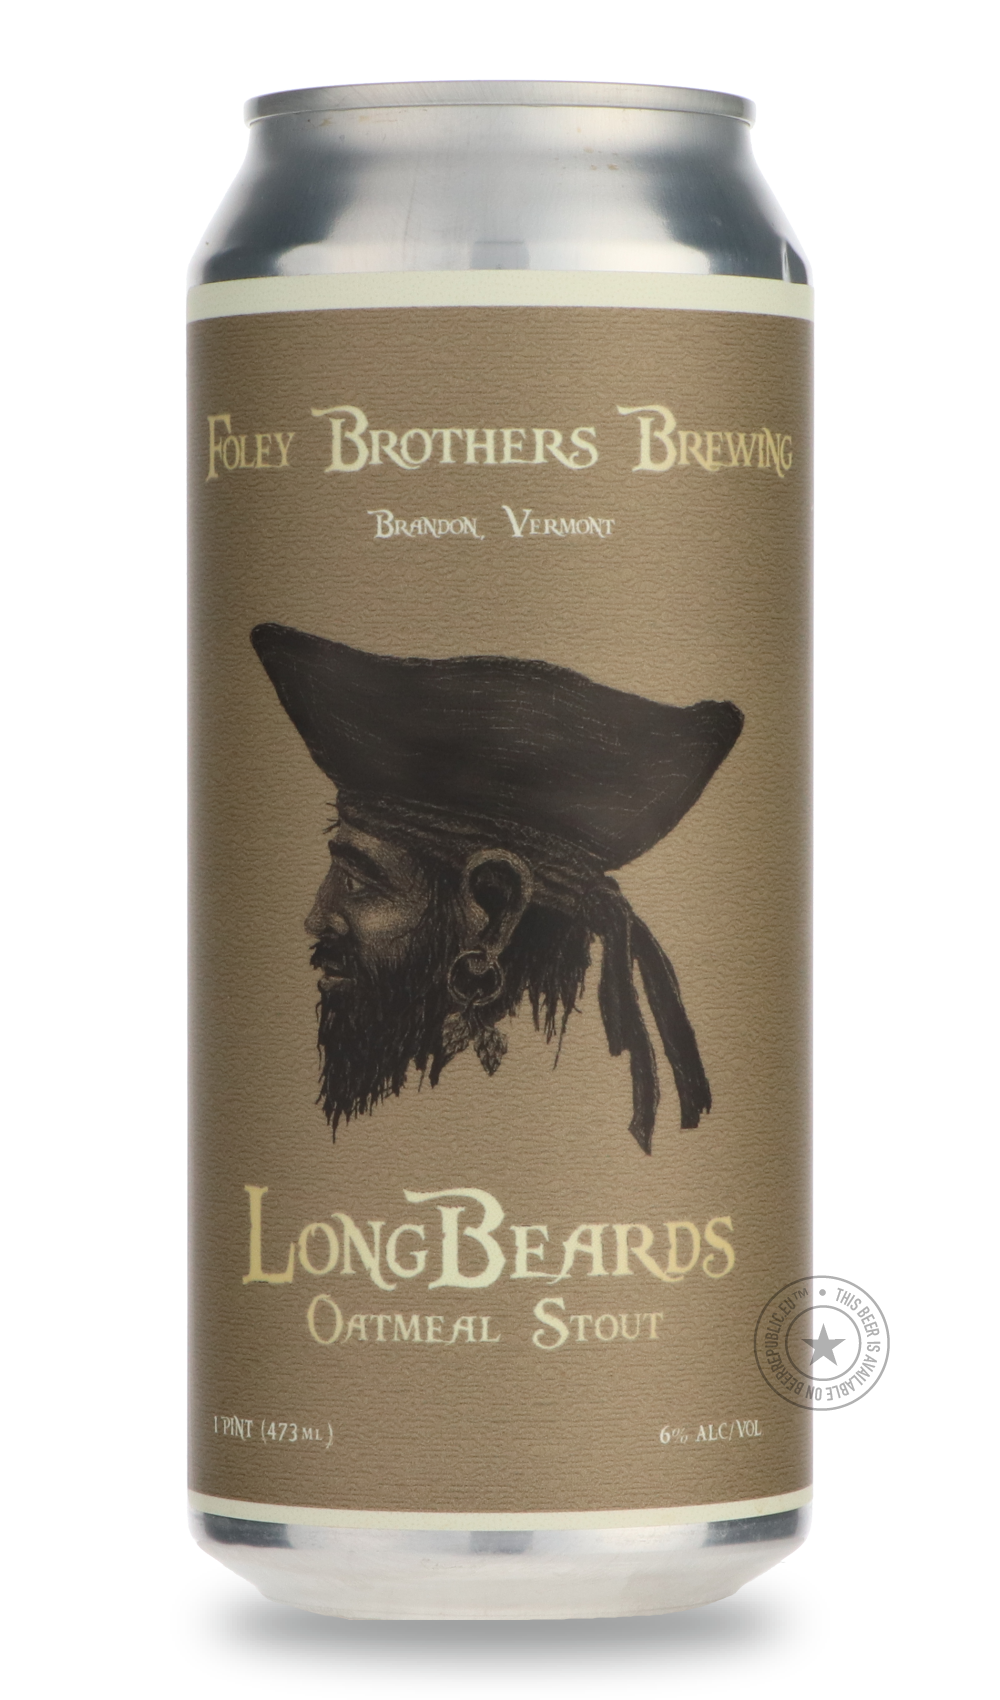 -Foley Brothers- Long Beard's Oatmeal Stout-Stout & Porter- Only @ Beer Republic - The best online beer store for American & Canadian craft beer - Buy beer online from the USA and Canada - Bier online kopen - Amerikaans bier kopen - Craft beer store - Craft beer kopen - Amerikanisch bier kaufen - Bier online kaufen - Acheter biere online - IPA - Stout - Porter - New England IPA - Hazy IPA - Imperial Stout - Barrel Aged - Barrel Aged Imperial Stout - Brown - Dark beer - Blond - Blonde - Pilsner - Lager - Whe